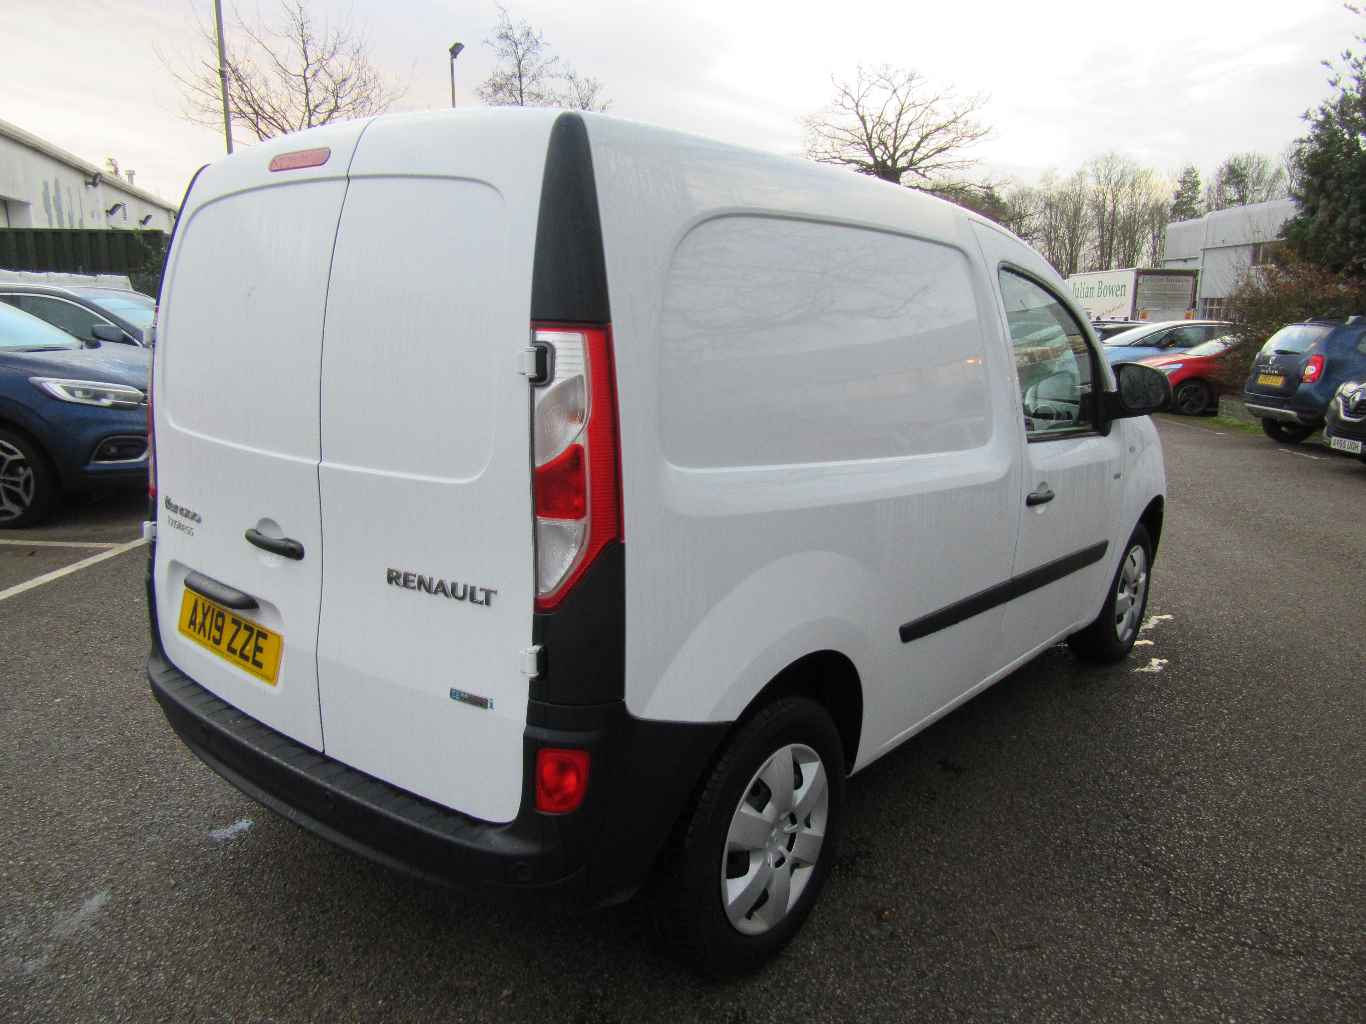 Renault Kangoo Business Ml20 I Ze for sale at Rawlinson